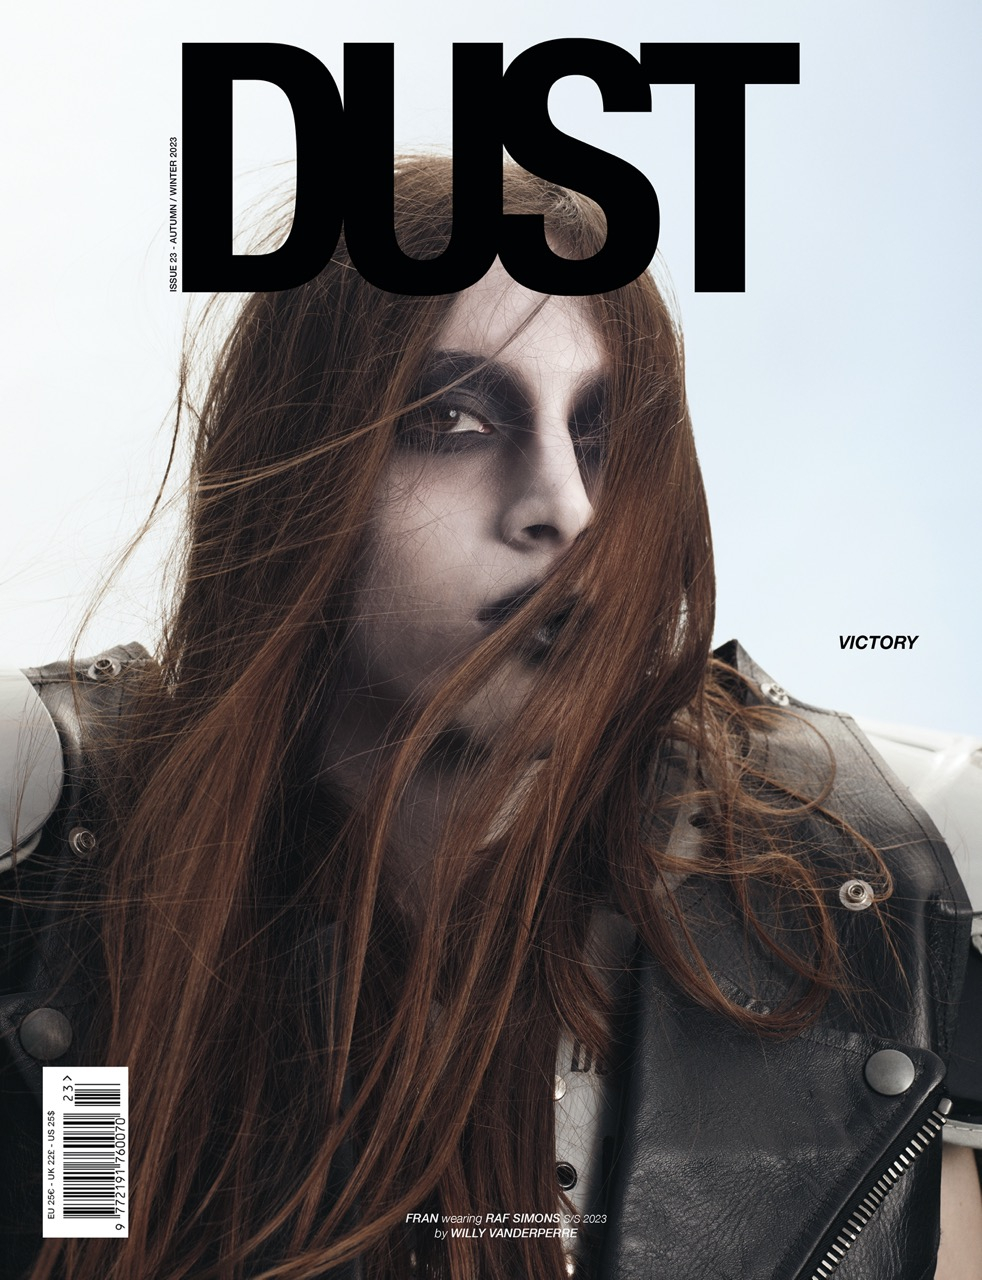 Olivier_Rizzo_DUST_23_COVER_Willy Vanderperre_LOWRES2.jpeg